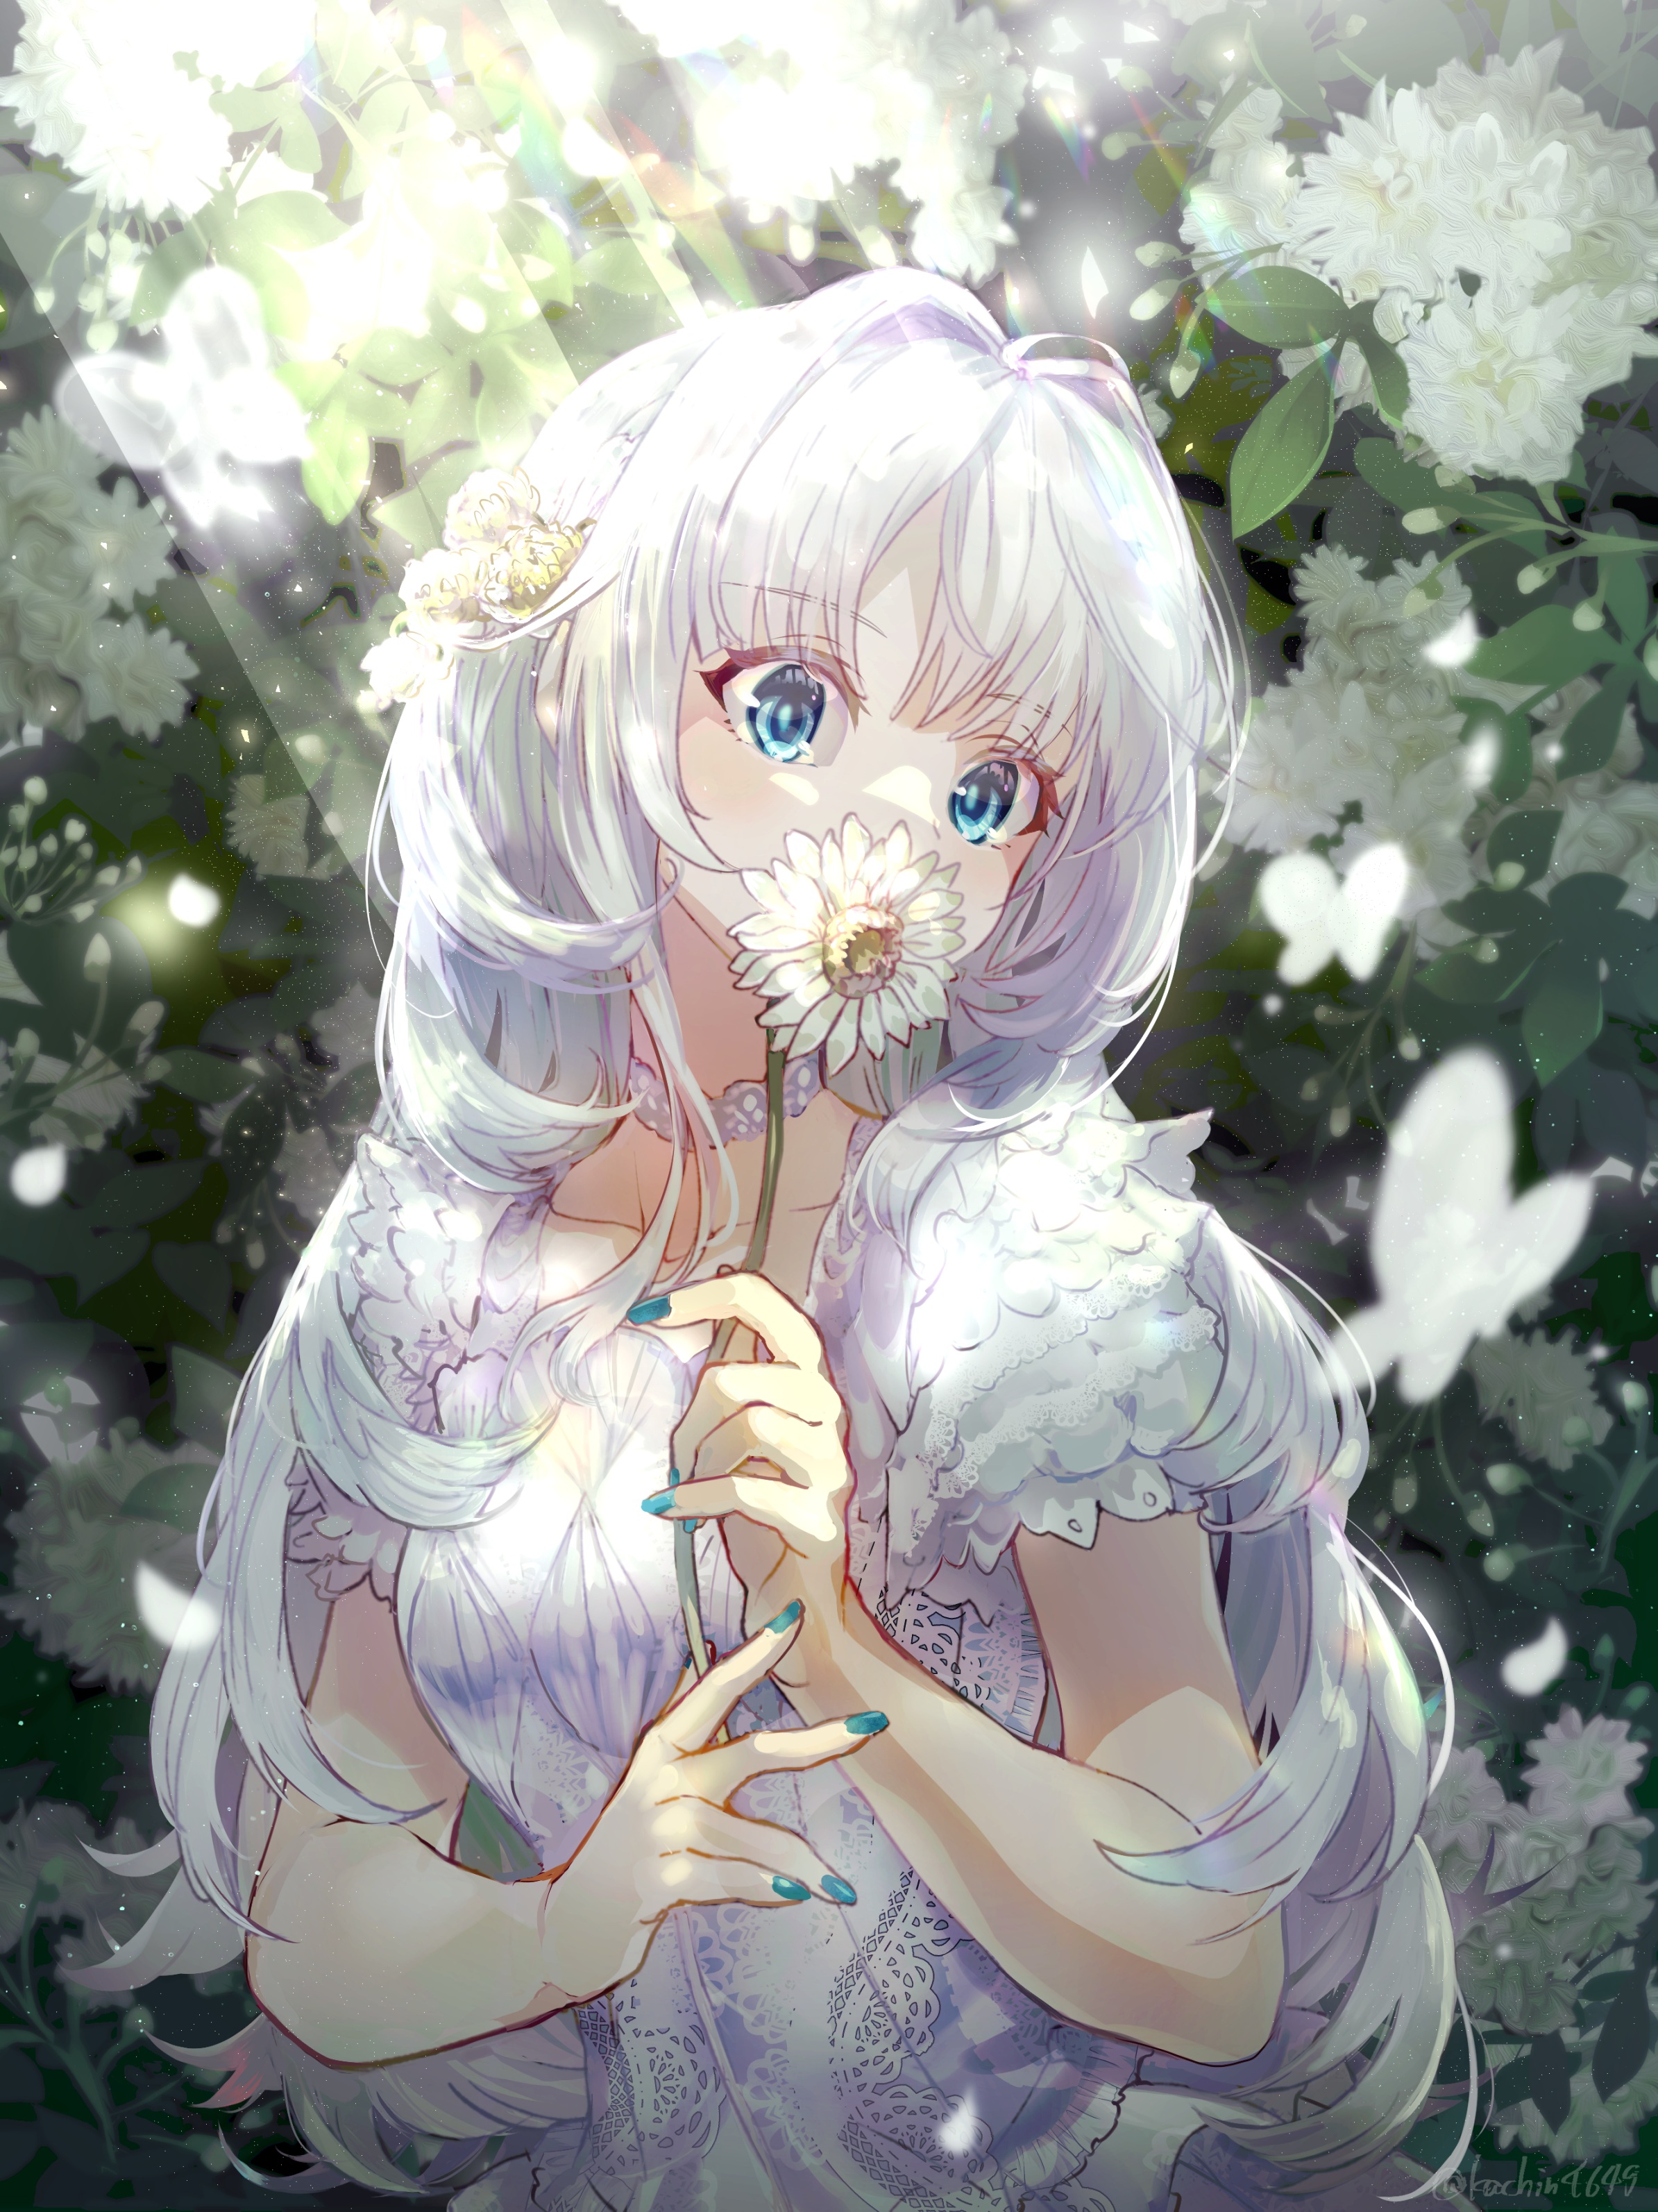 Anime Girl With Long White Hair And Blue Eyes